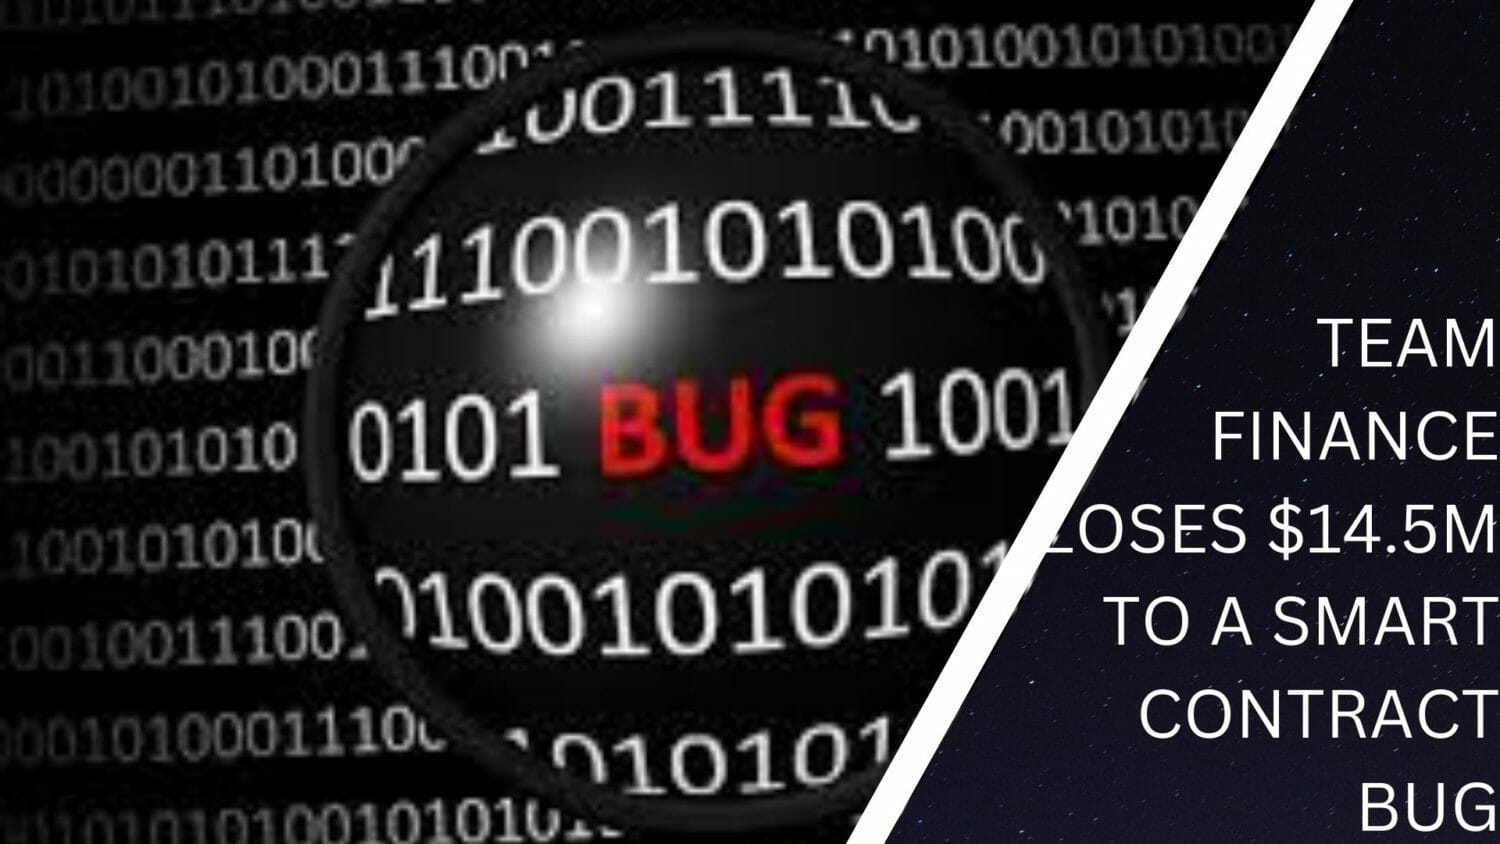 Team Finance Loses $14.5M To A Smart Contract Bug